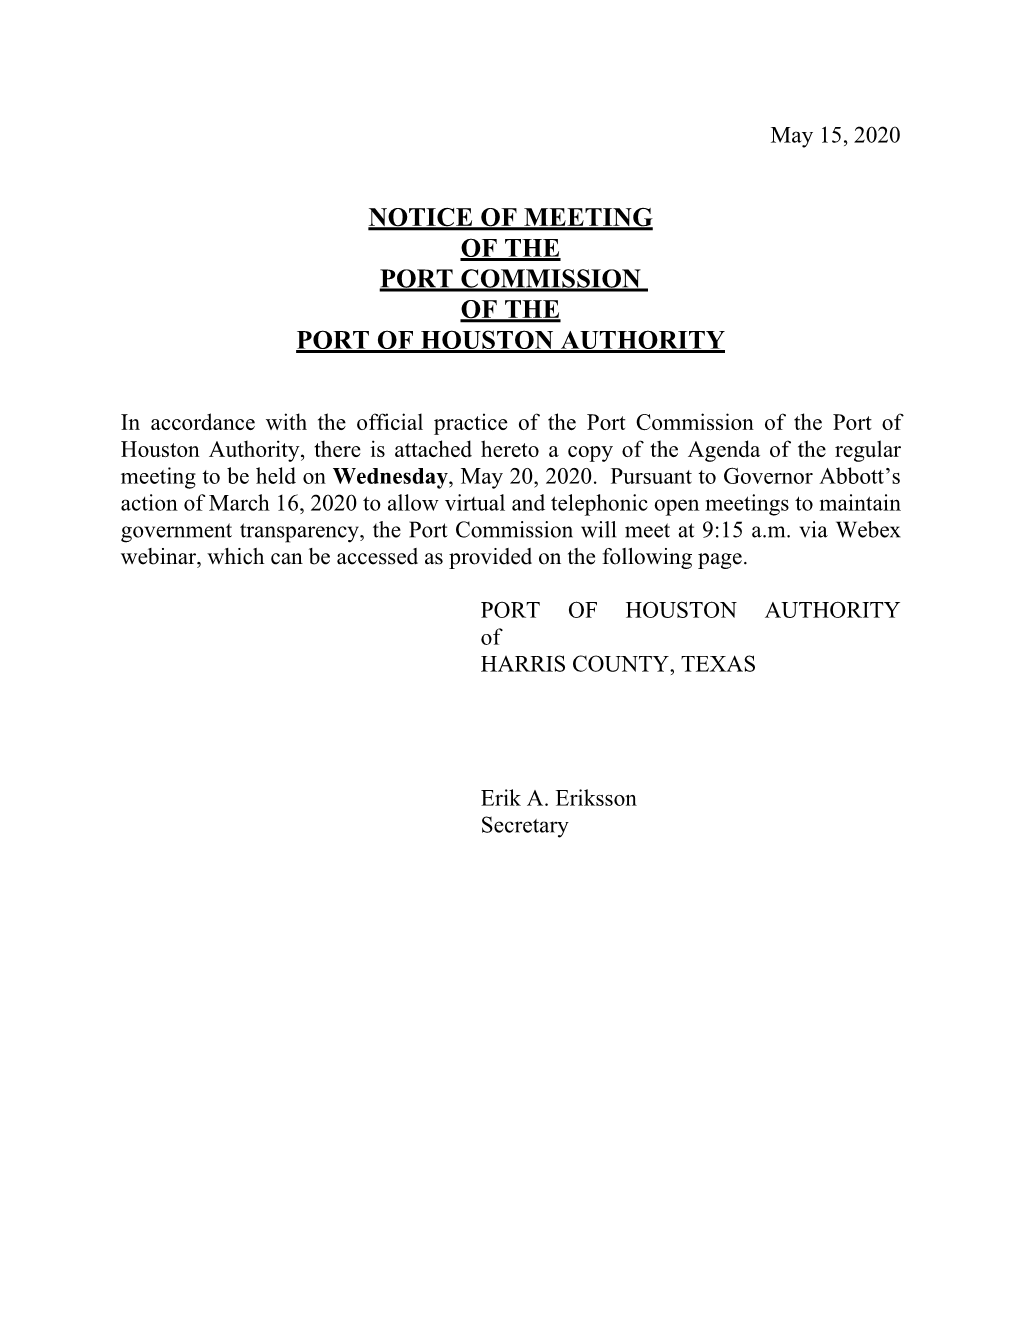 Notice of Meeting of the Port Commission of the Port of Houston Authority